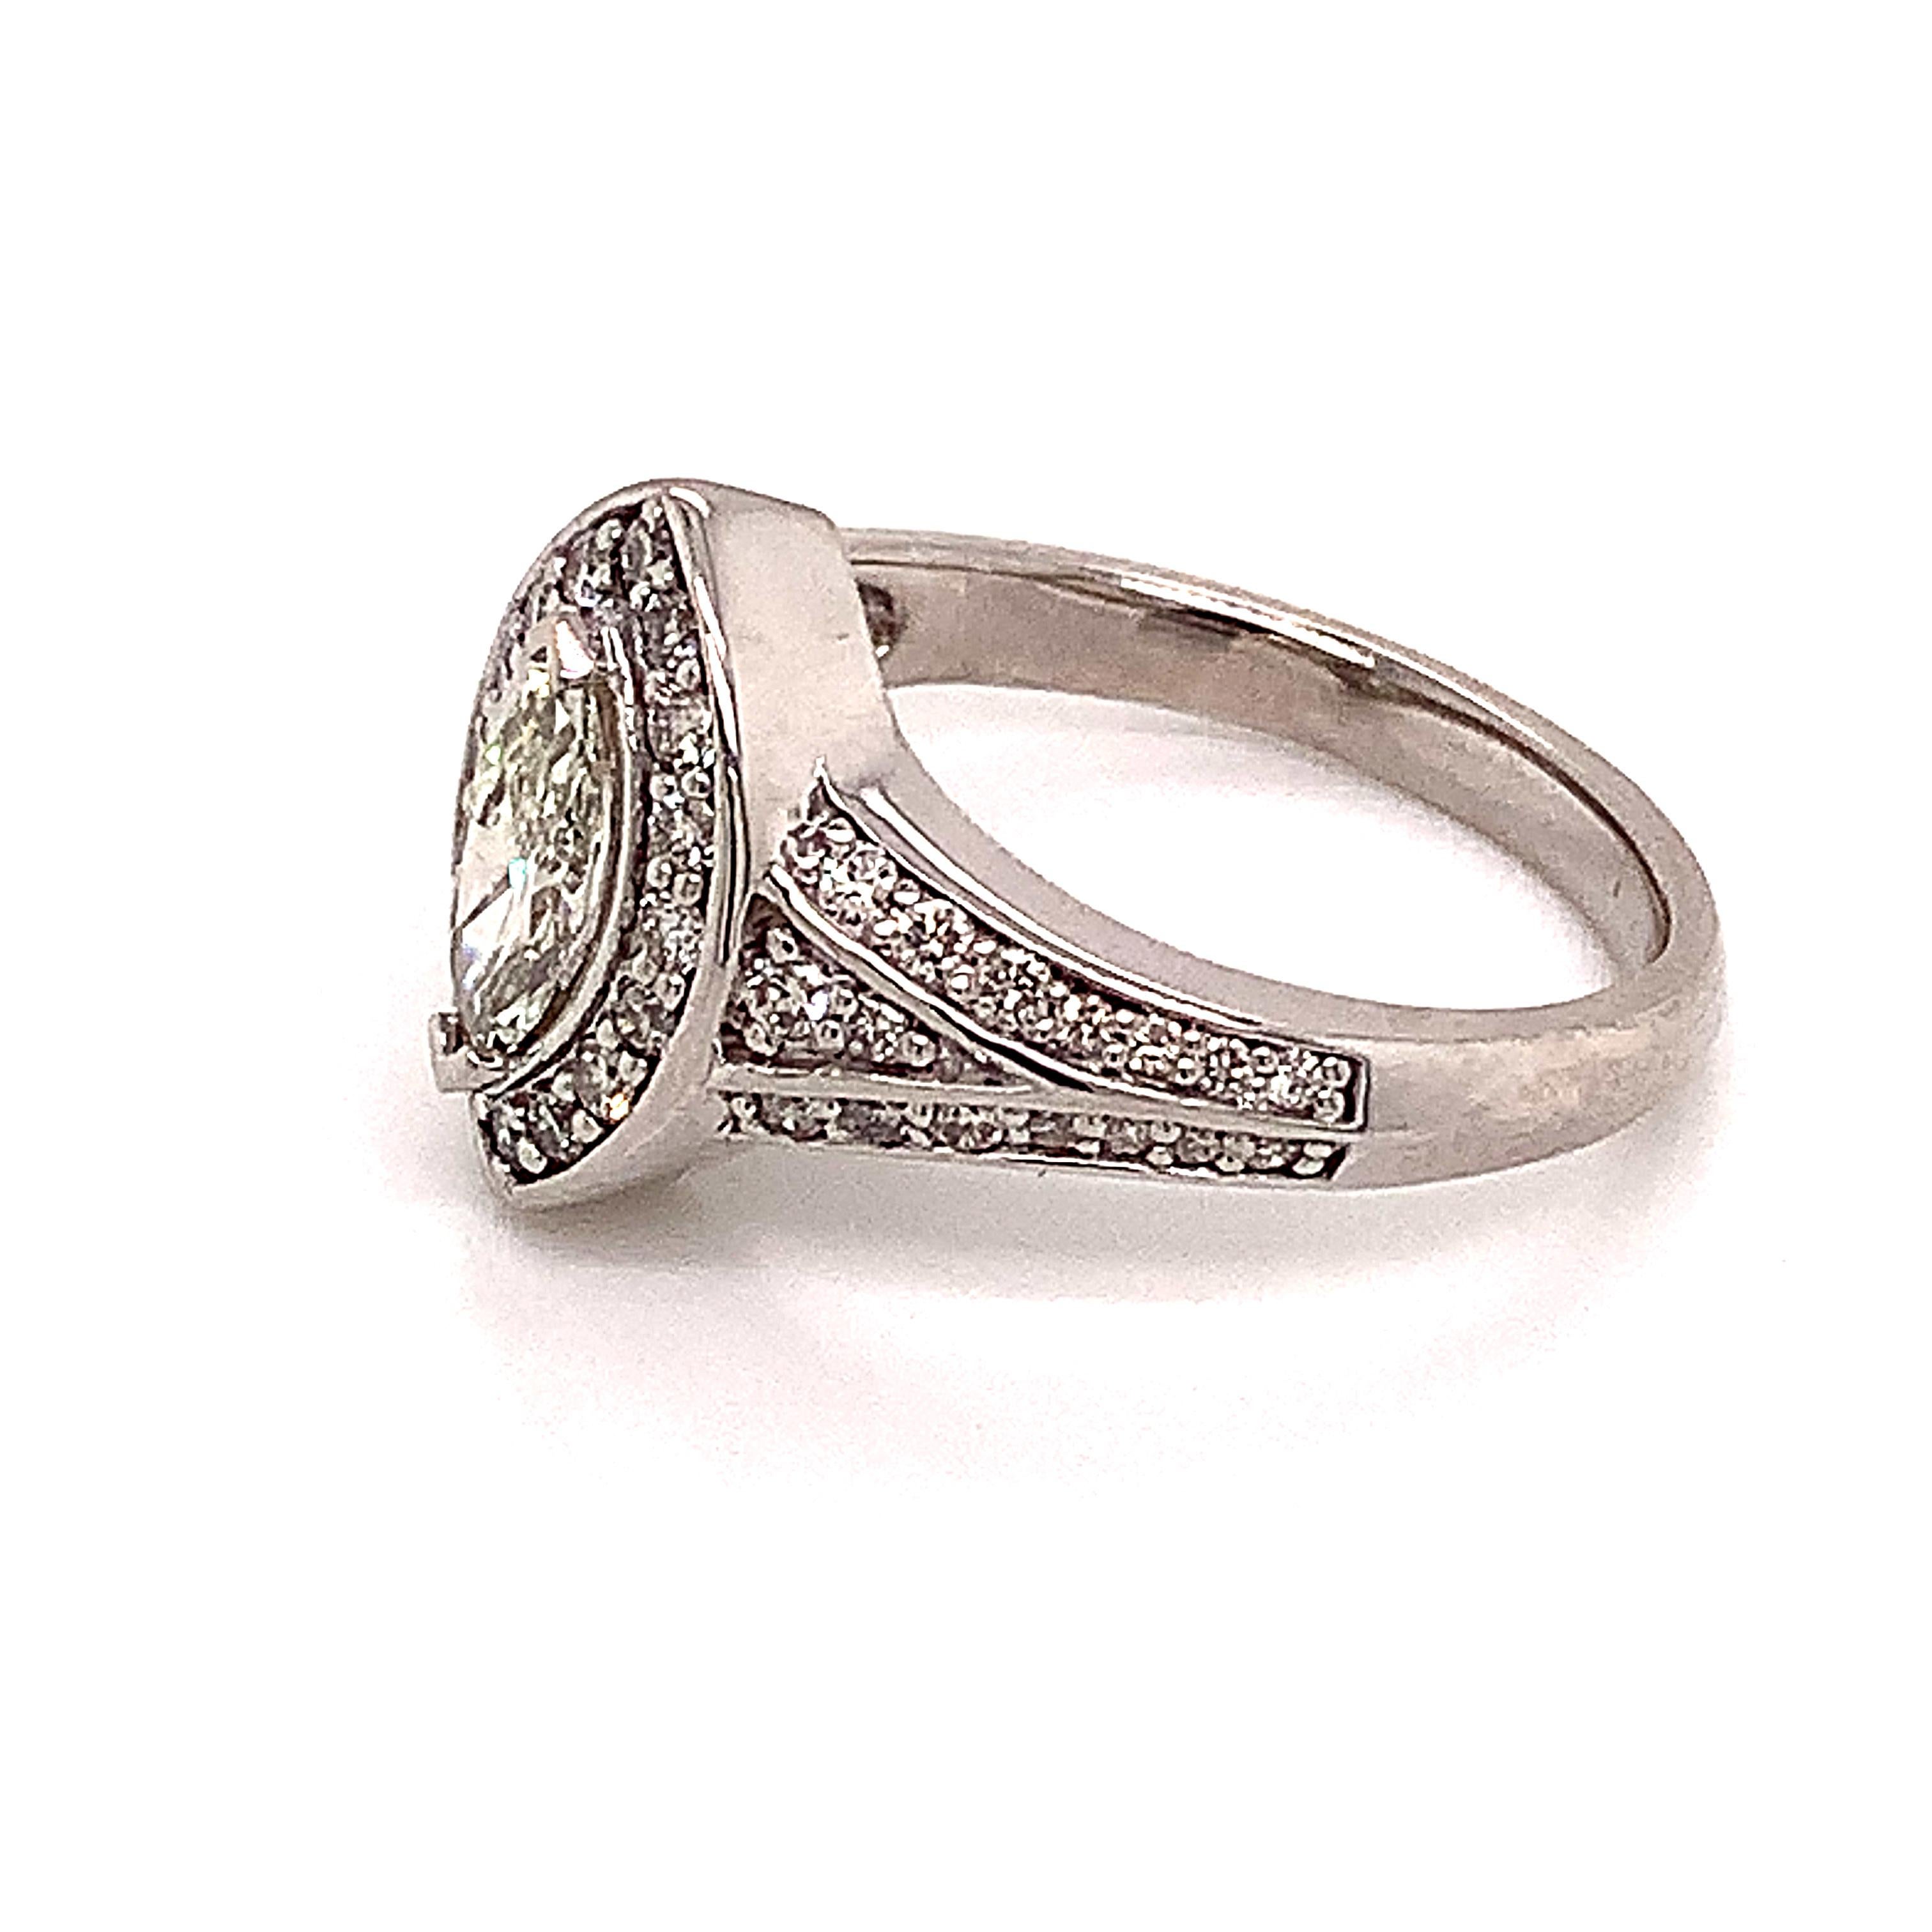 Diamond Ring 14k White Gold 0.45 TCW 4.88g Certified For Sale 7